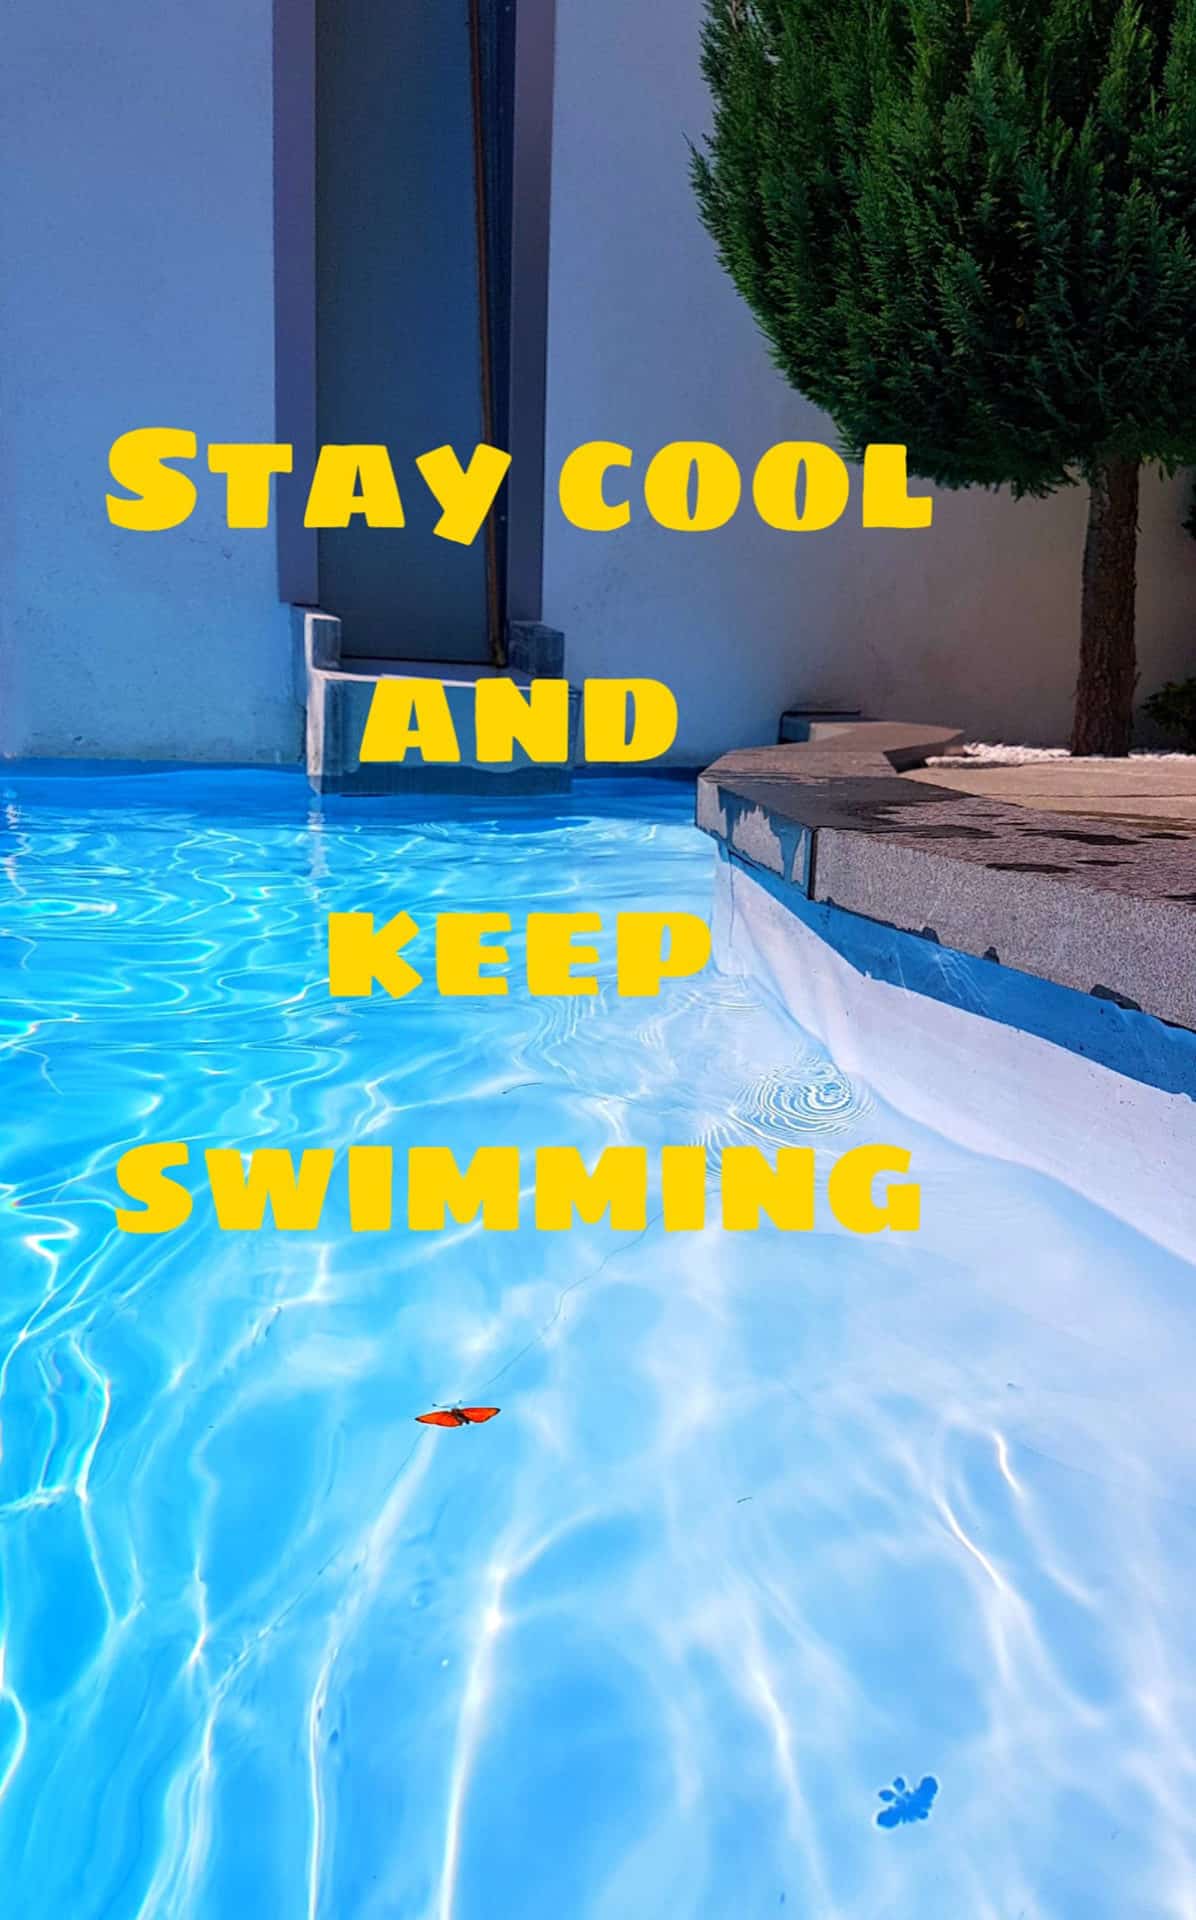 Stay cool and keep swimming